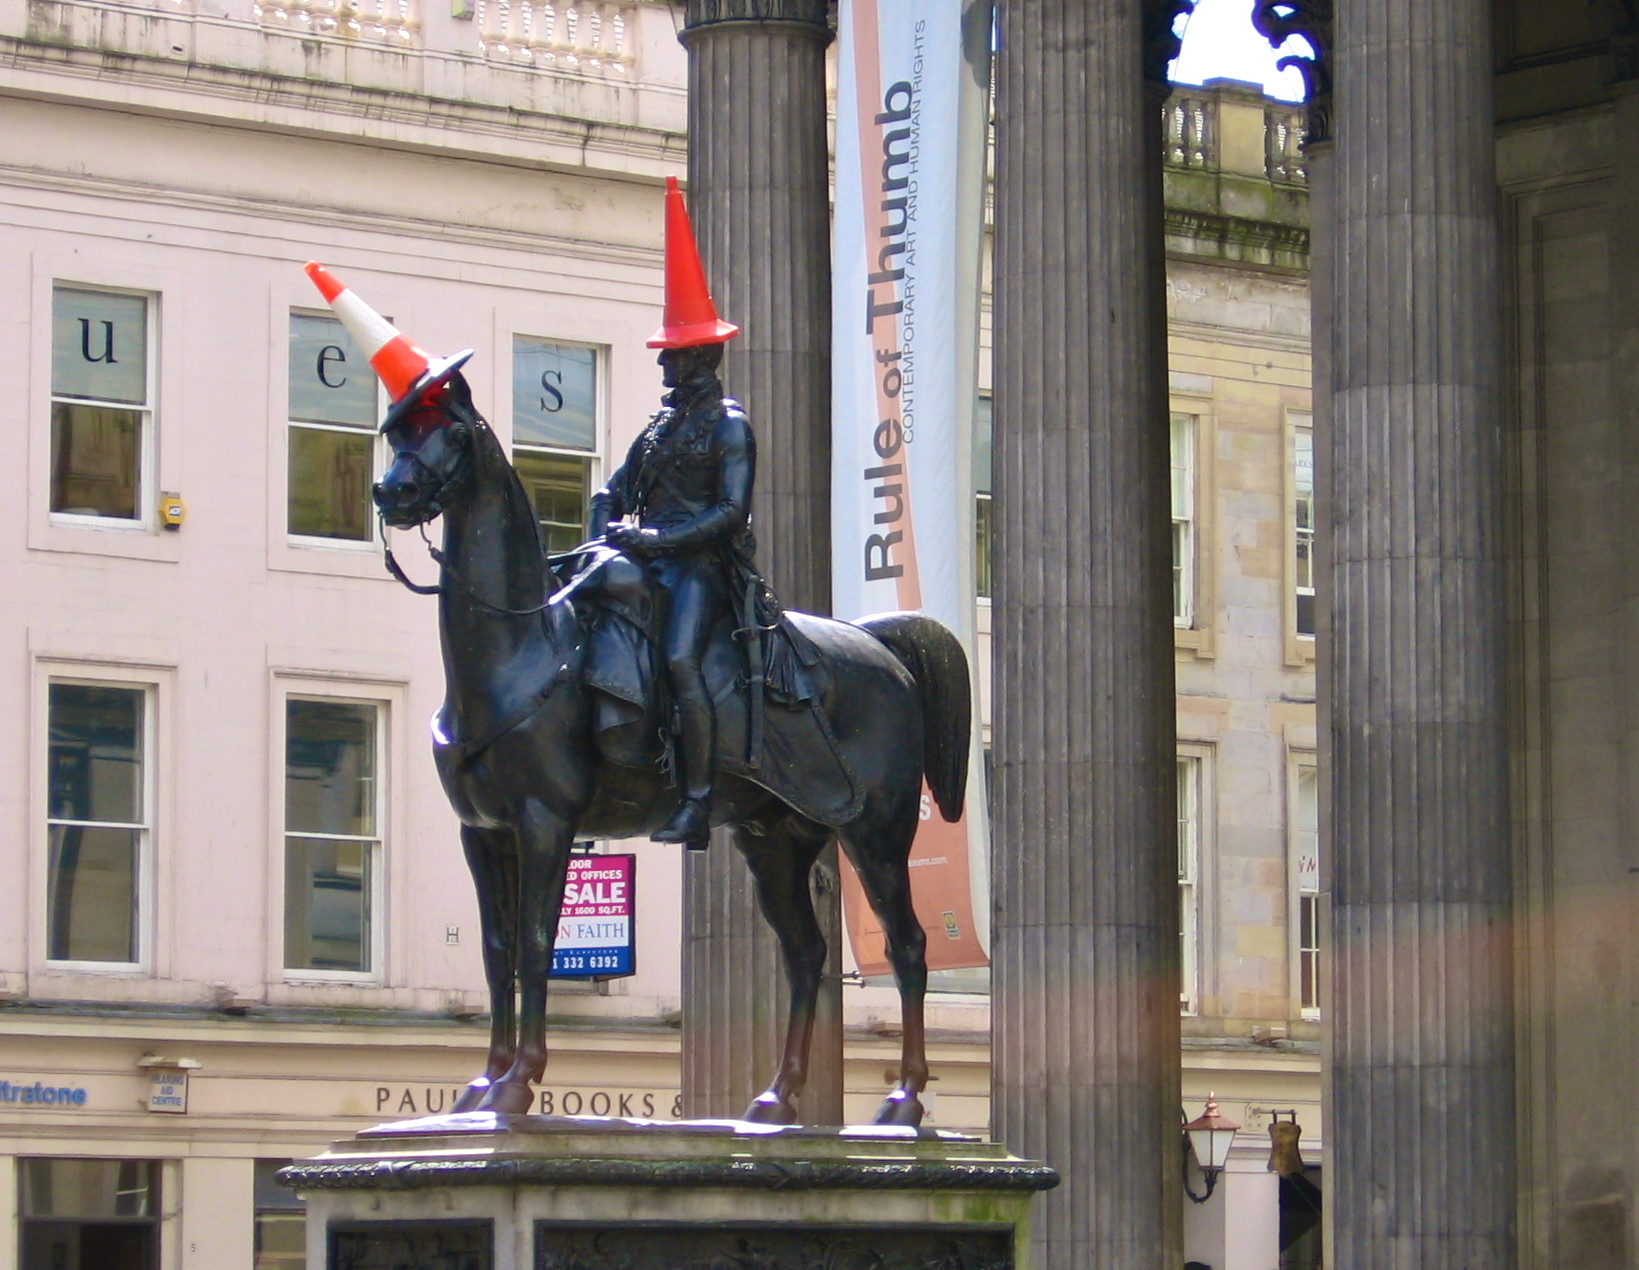 Glasgow City Impresses with Architecture, Culture and History, an European Destination Worth Visiting – Part 2